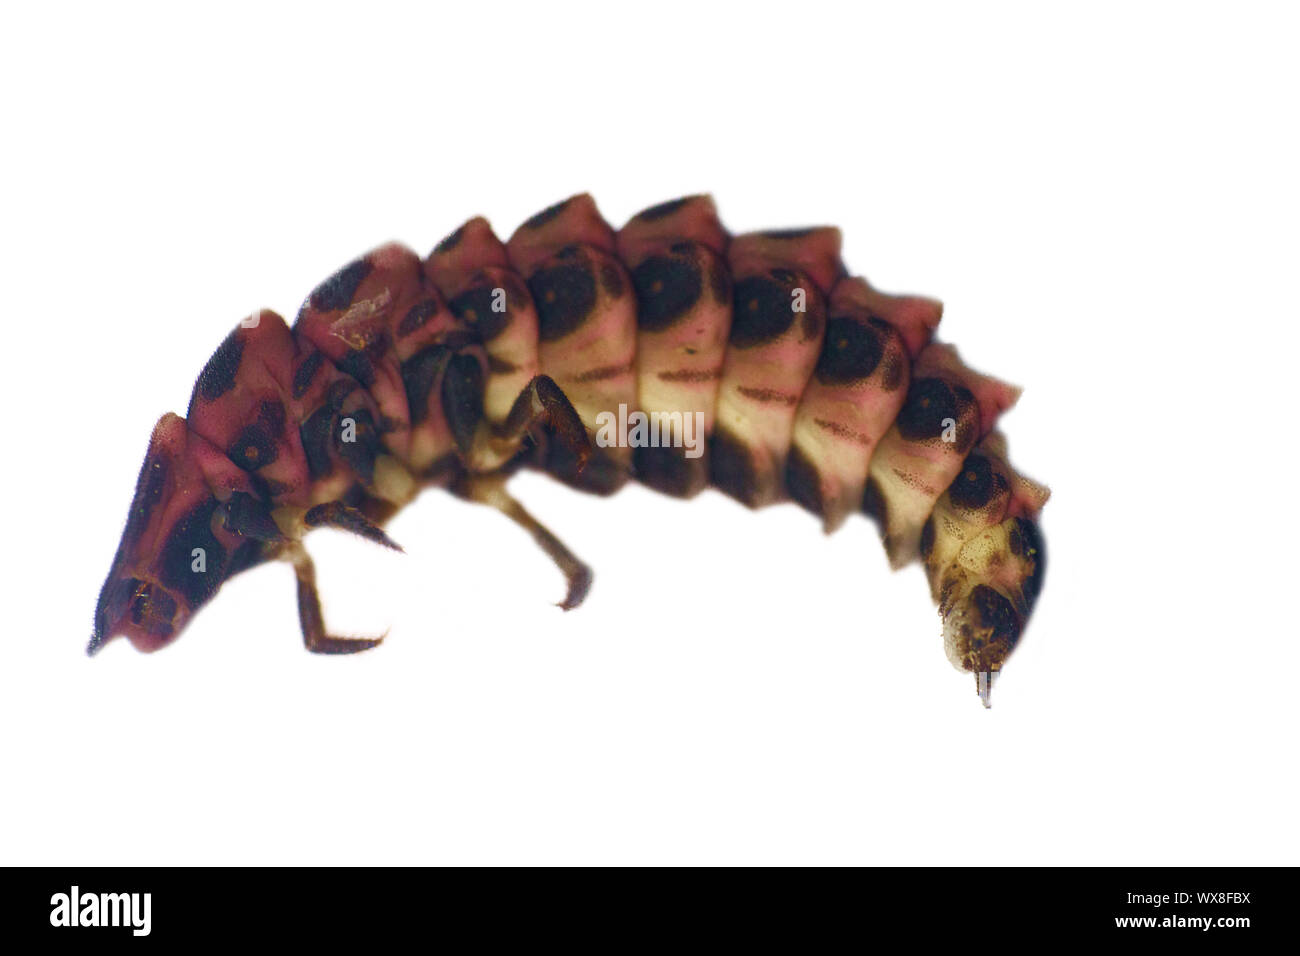 larvae of some insect from the forest litter Stock Photo